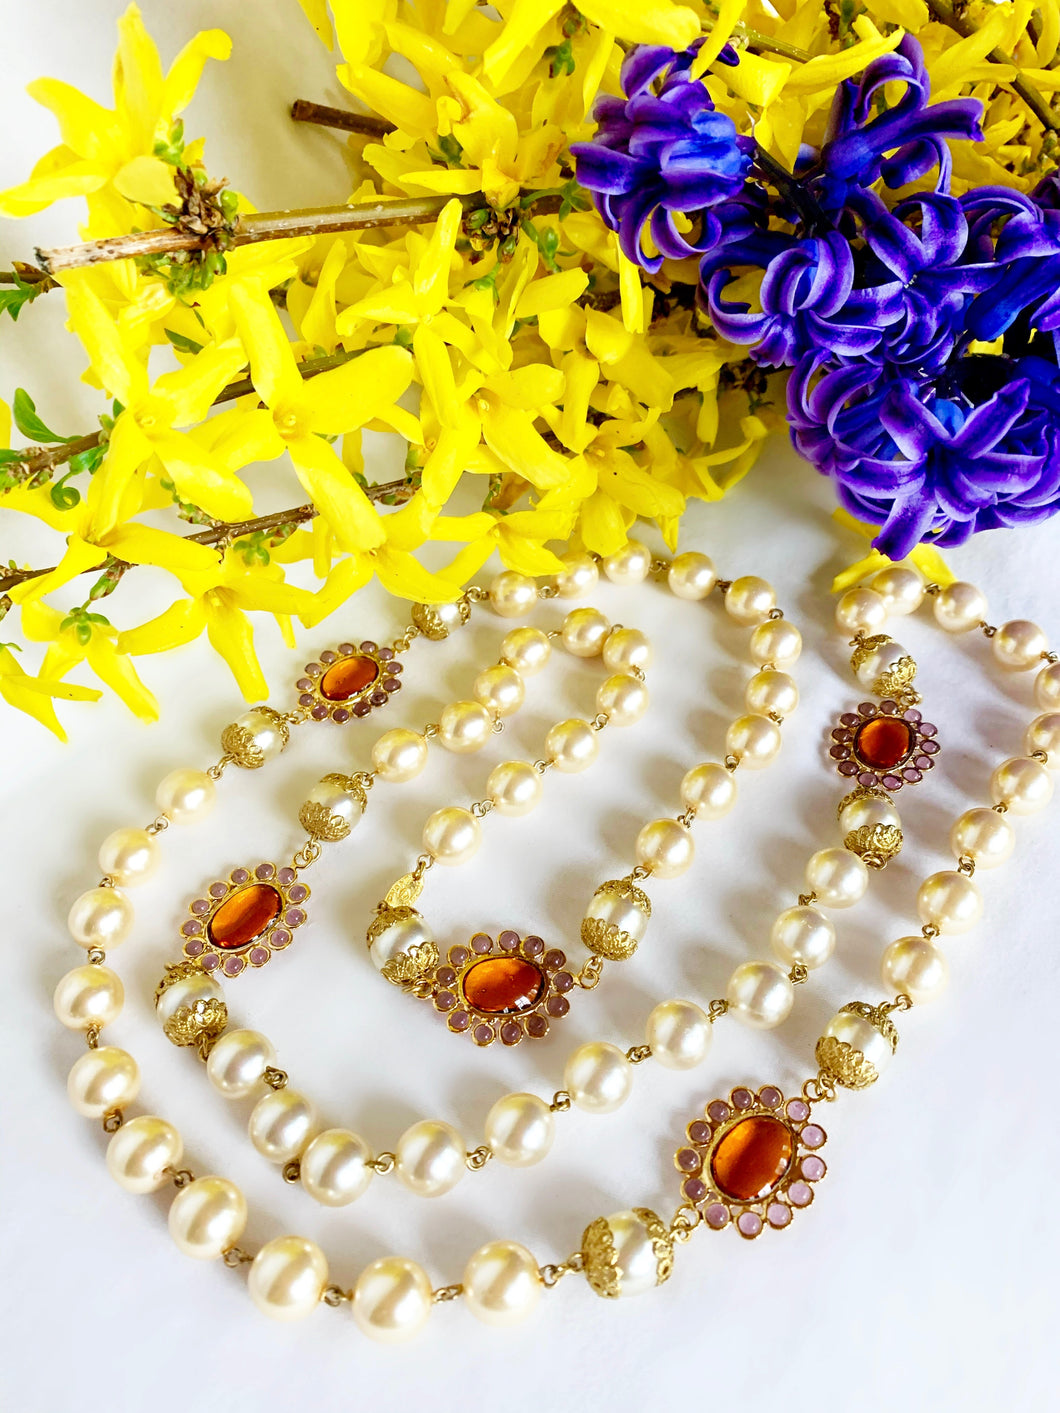 CHANEL RARE GRIPOIX DAISY FLOWERS AND GLASS PEARL VINTAGE NECKLACE